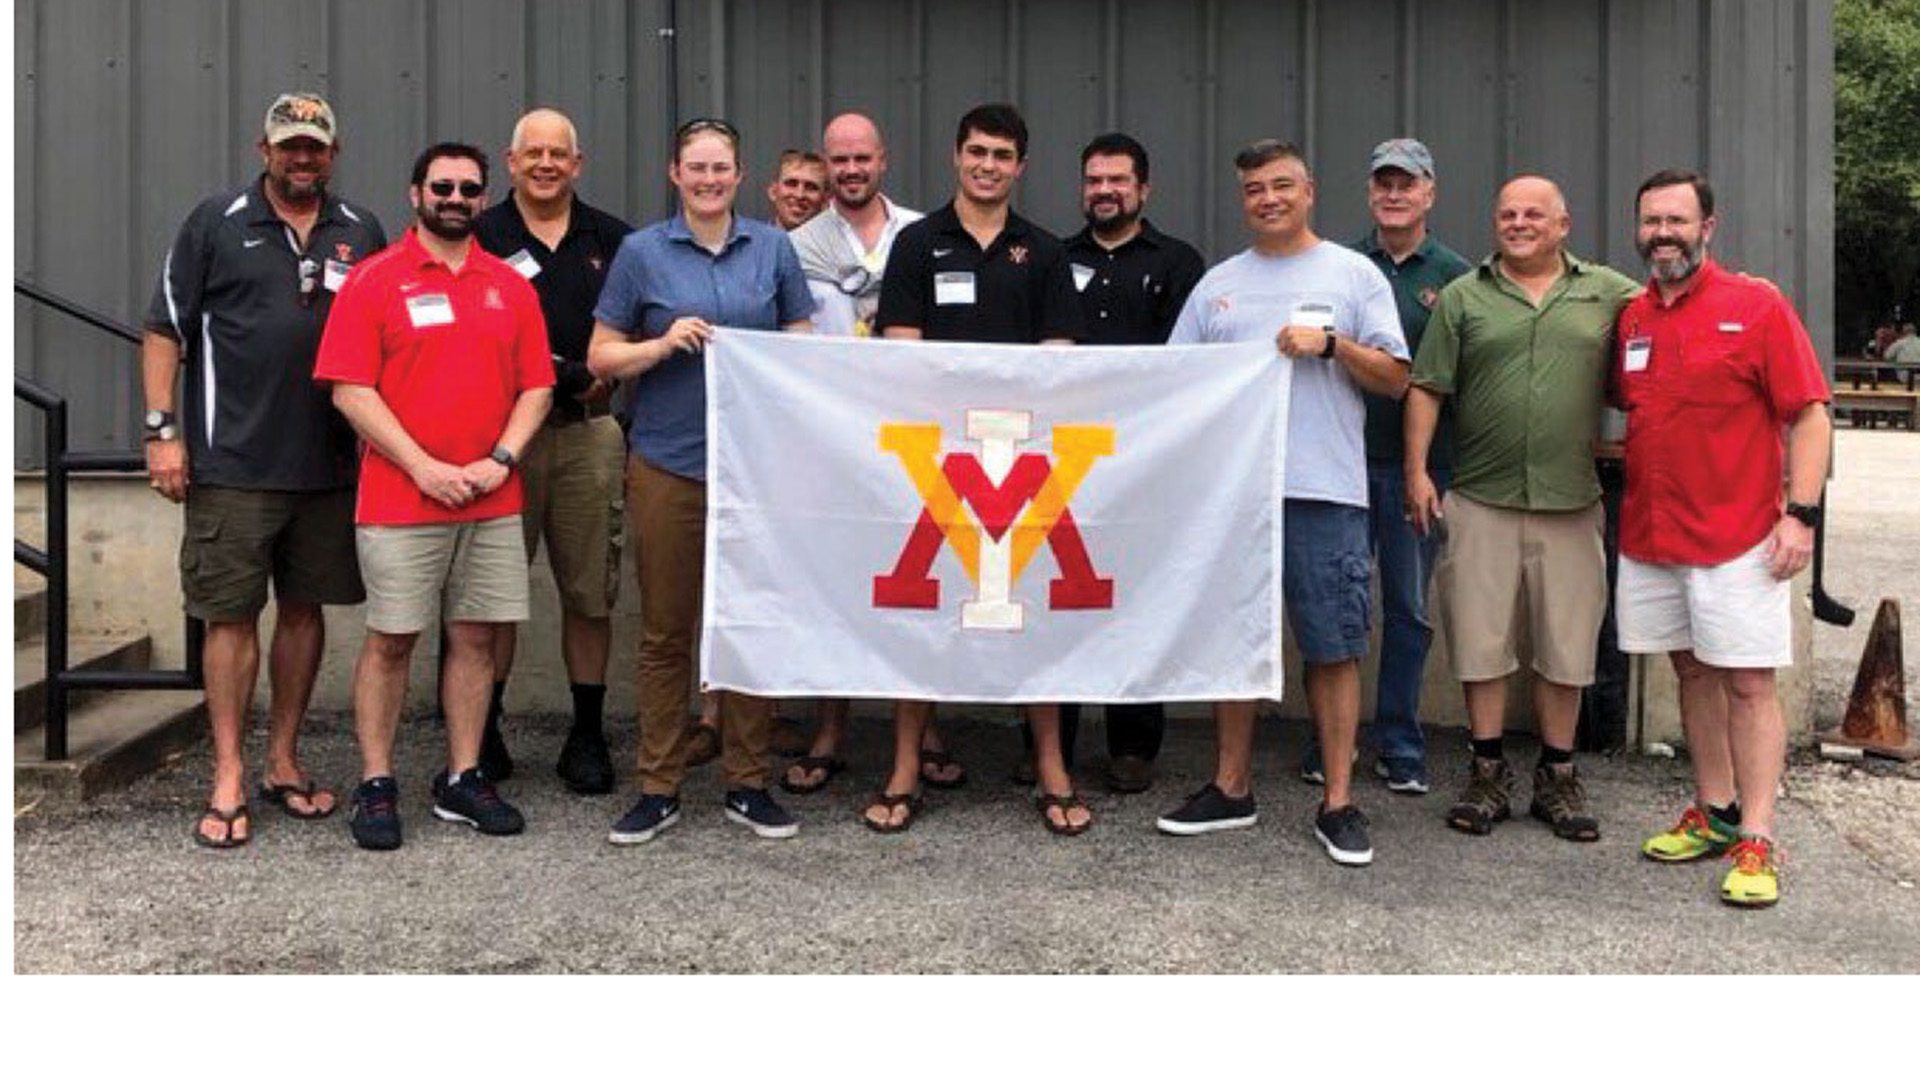 Group of people holding a VMI flag and smiling.